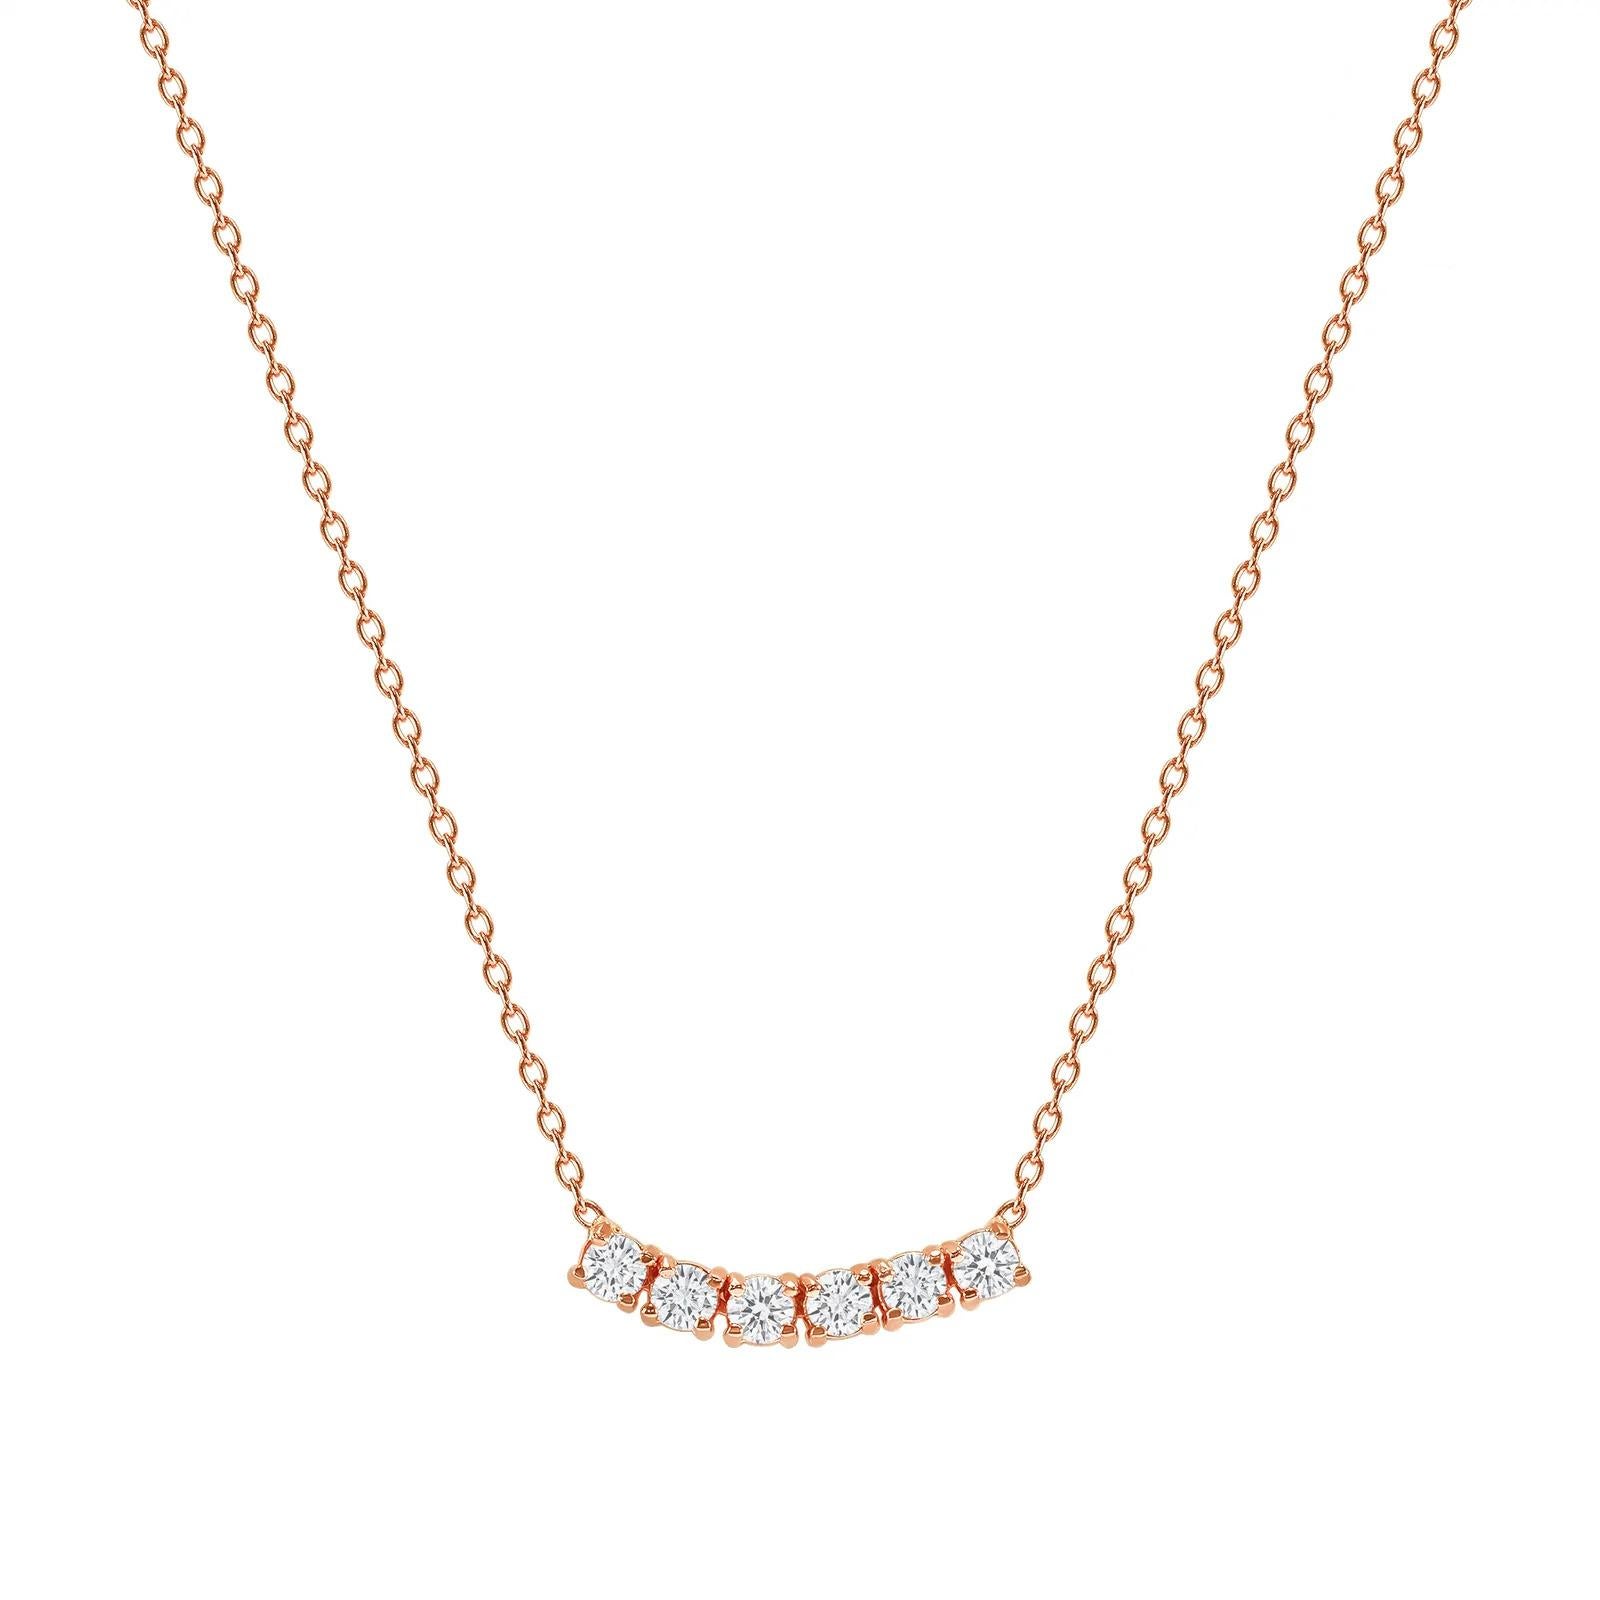 This petite, curved diamond necklace is crafted with gorgeous 14k gold set with six round diamonds.  

Gold: 14k 
Diamond Total Carats: 1.5 ct
Diamond Cut: Round (6 diamonds)
Diamond Clarity: VS
Diamond Color: F
Color: Rose Gold
Necklace Length: 24